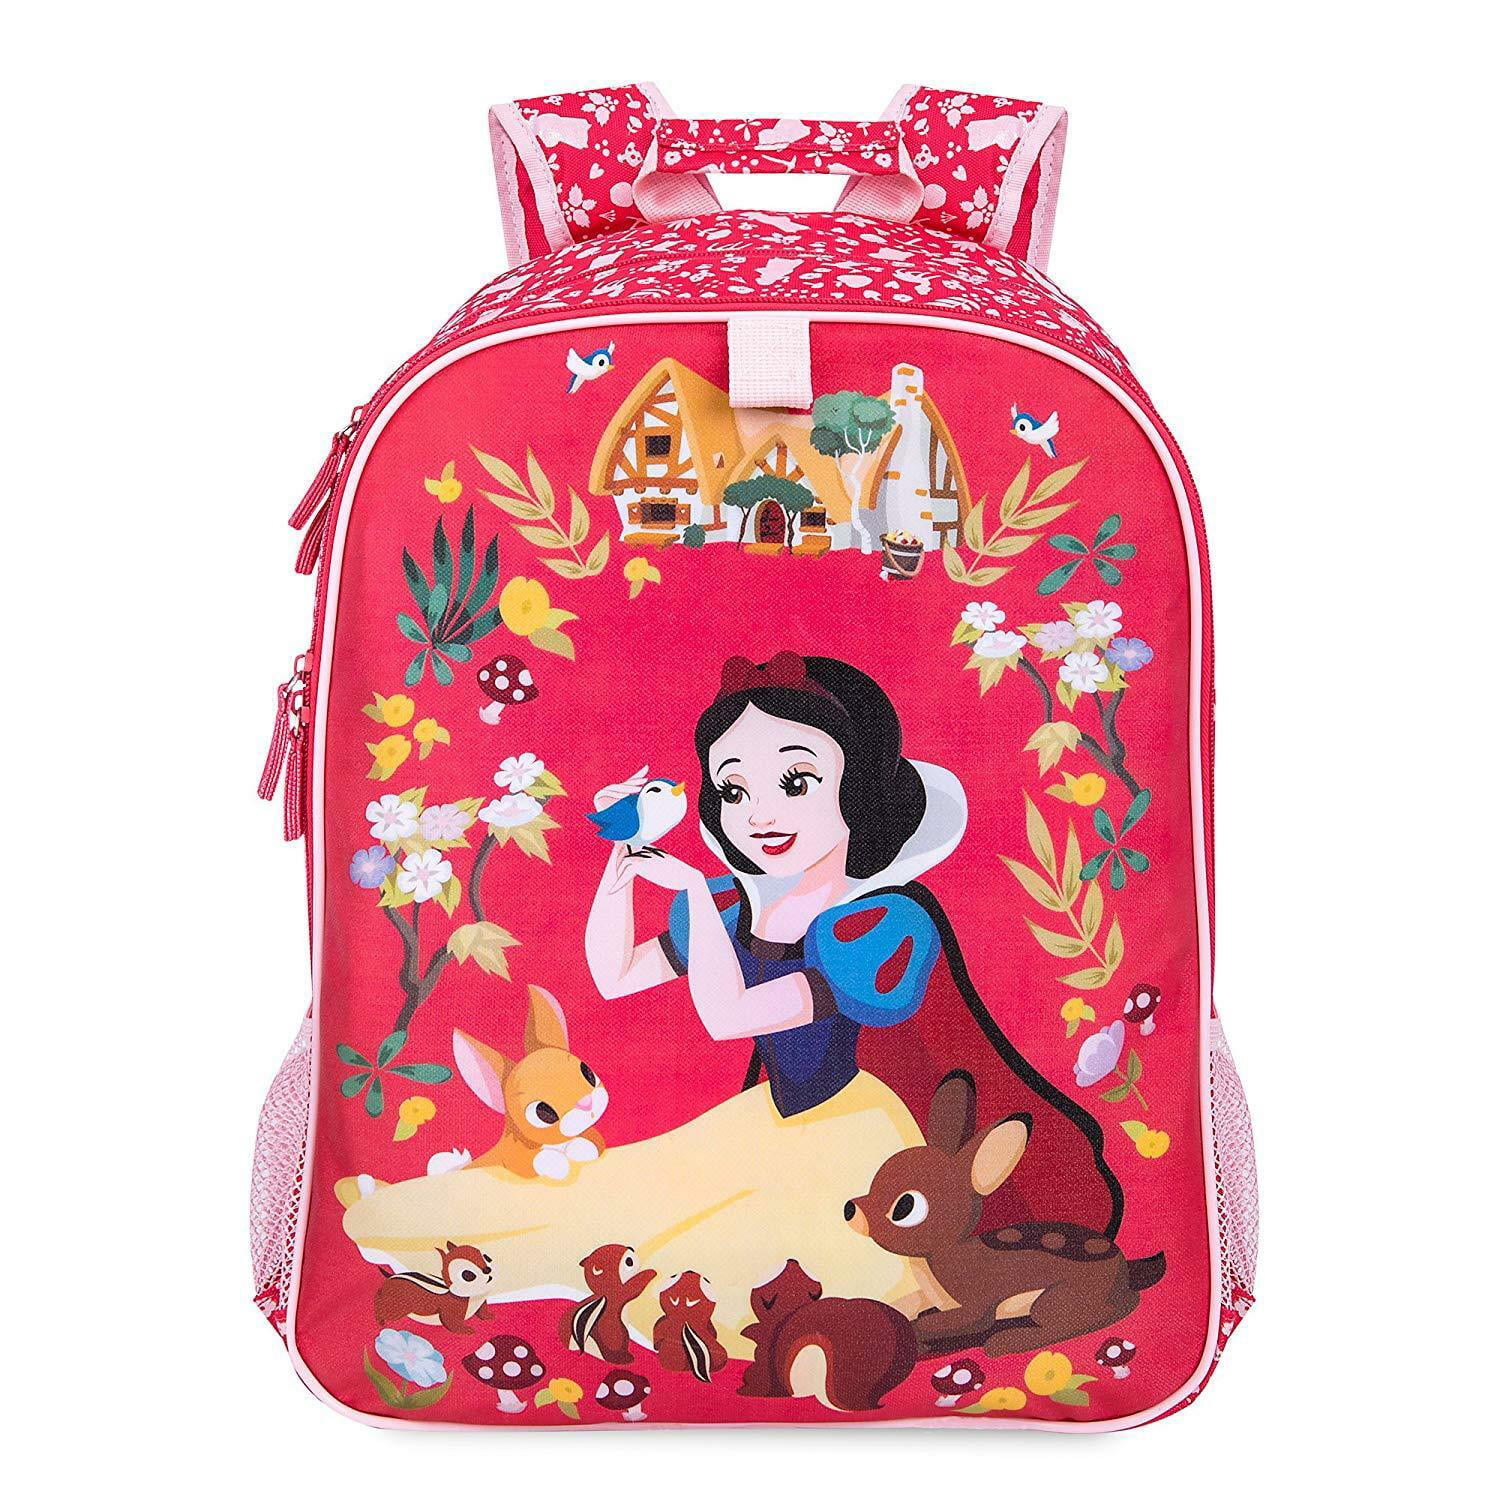 Disney Princess Snow White 12" Shine Pink Color Small Backpack 